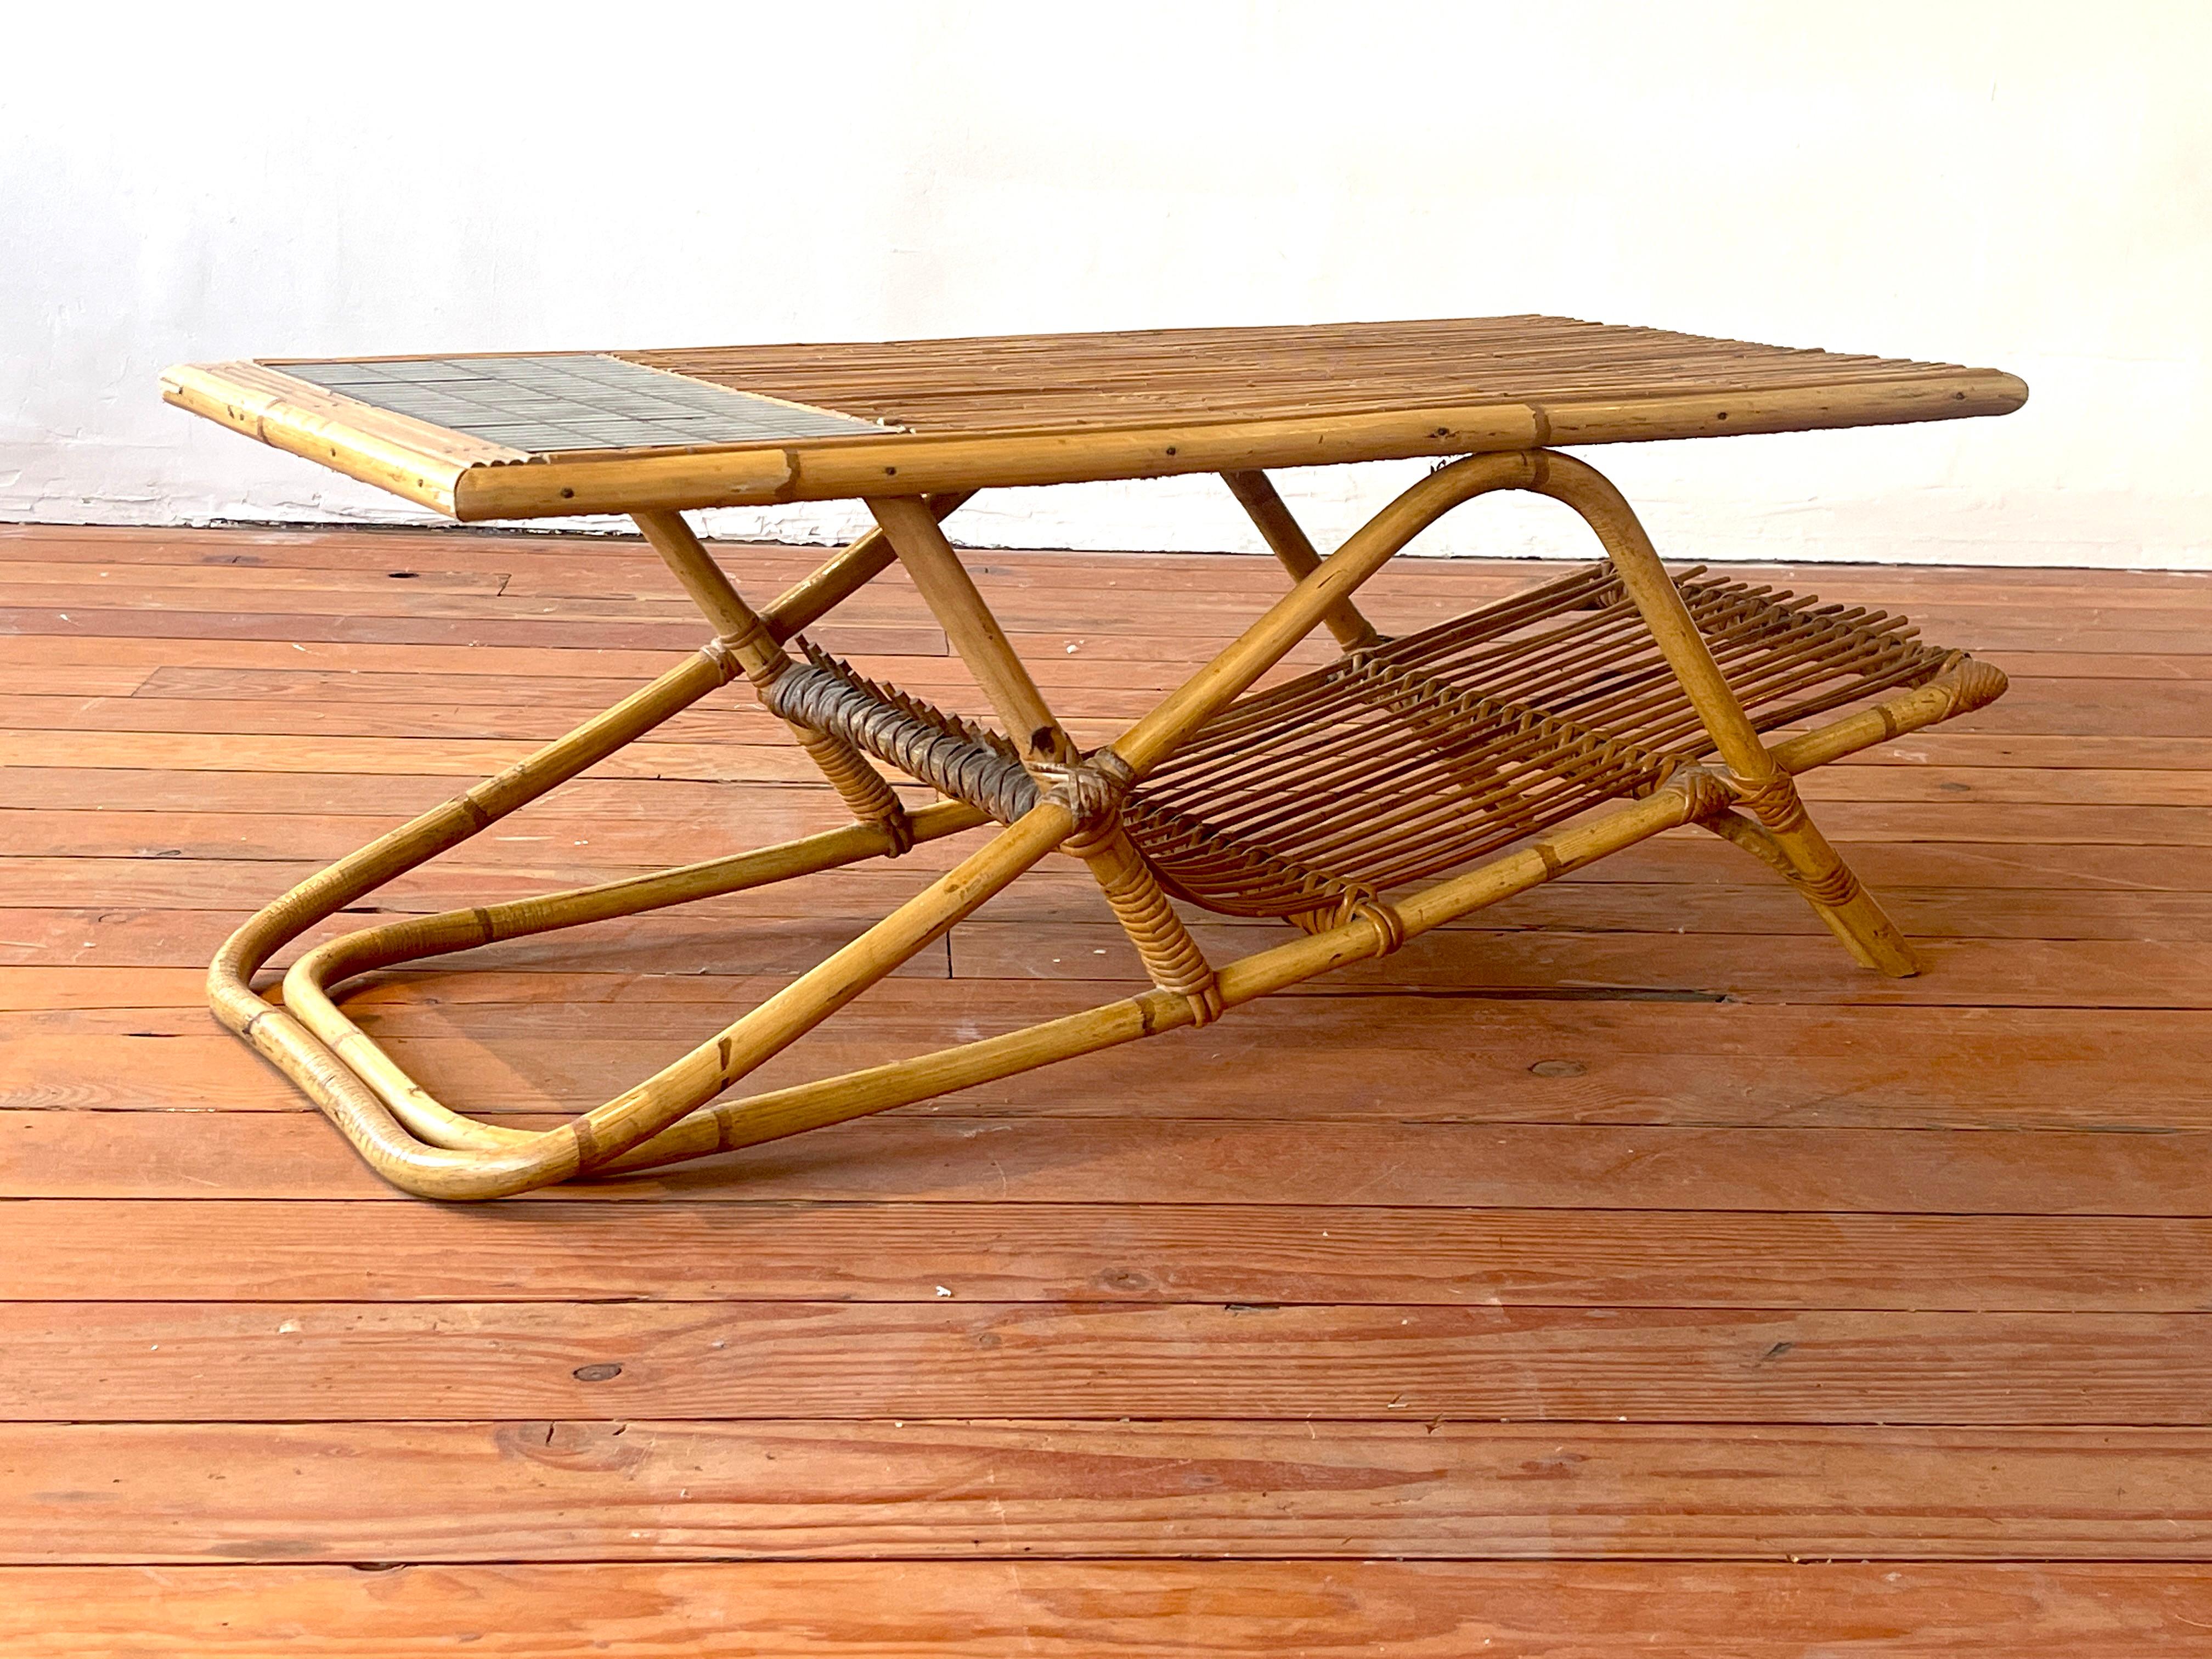 Handsome bamboo coffee table by Roger Capron with black ceramic tiles, bamboo top with floating shelf for magazines or books
Great design